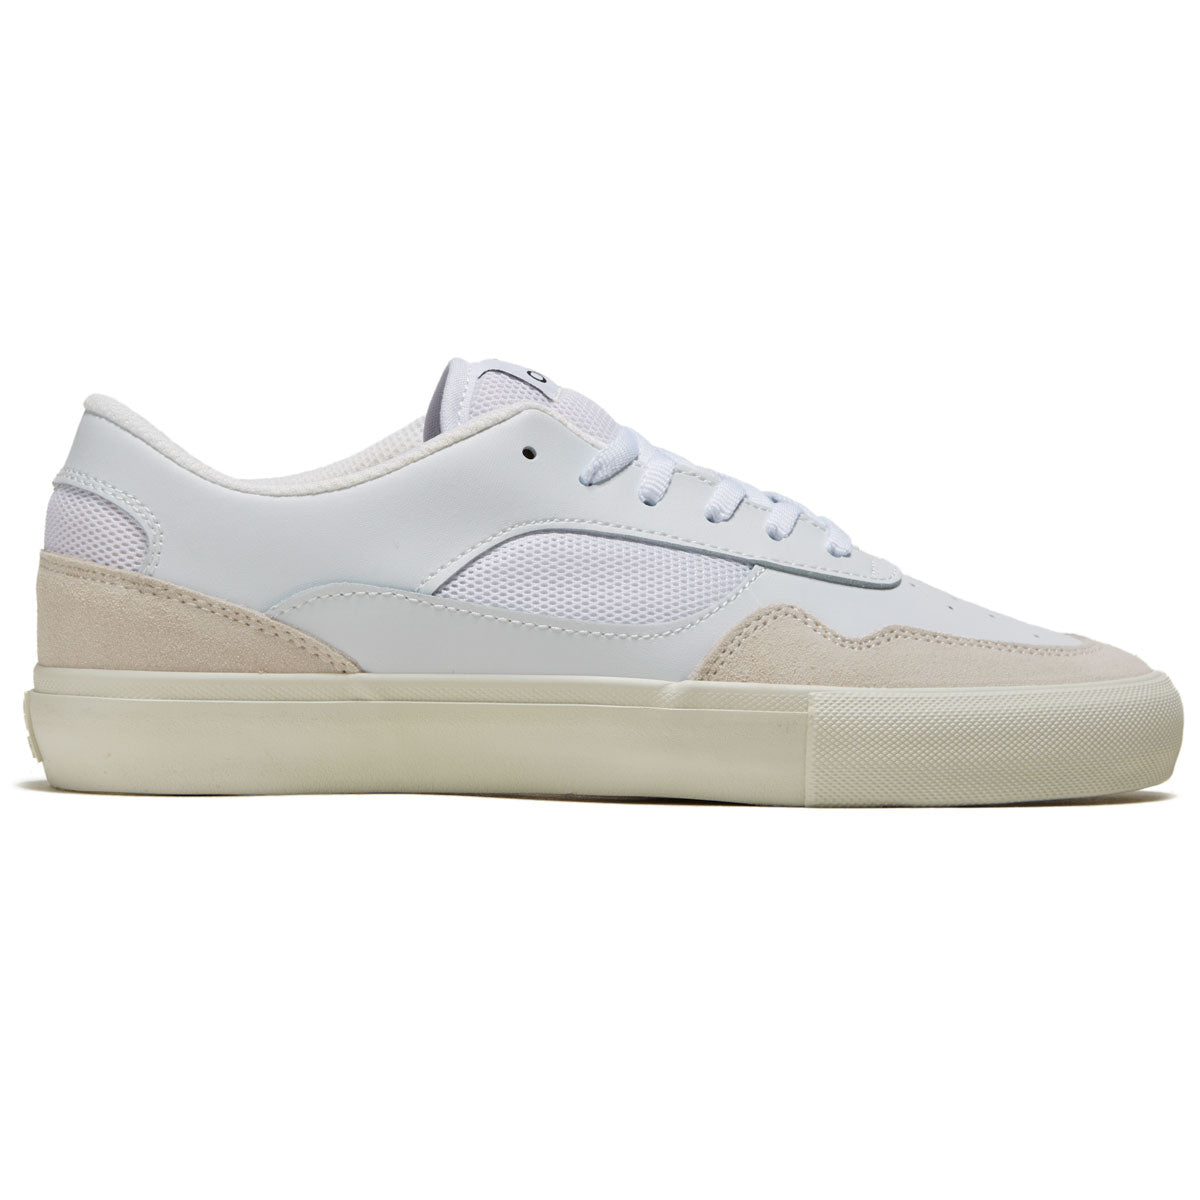 Opus Standard Low Shoes - Off White/Cream image 1